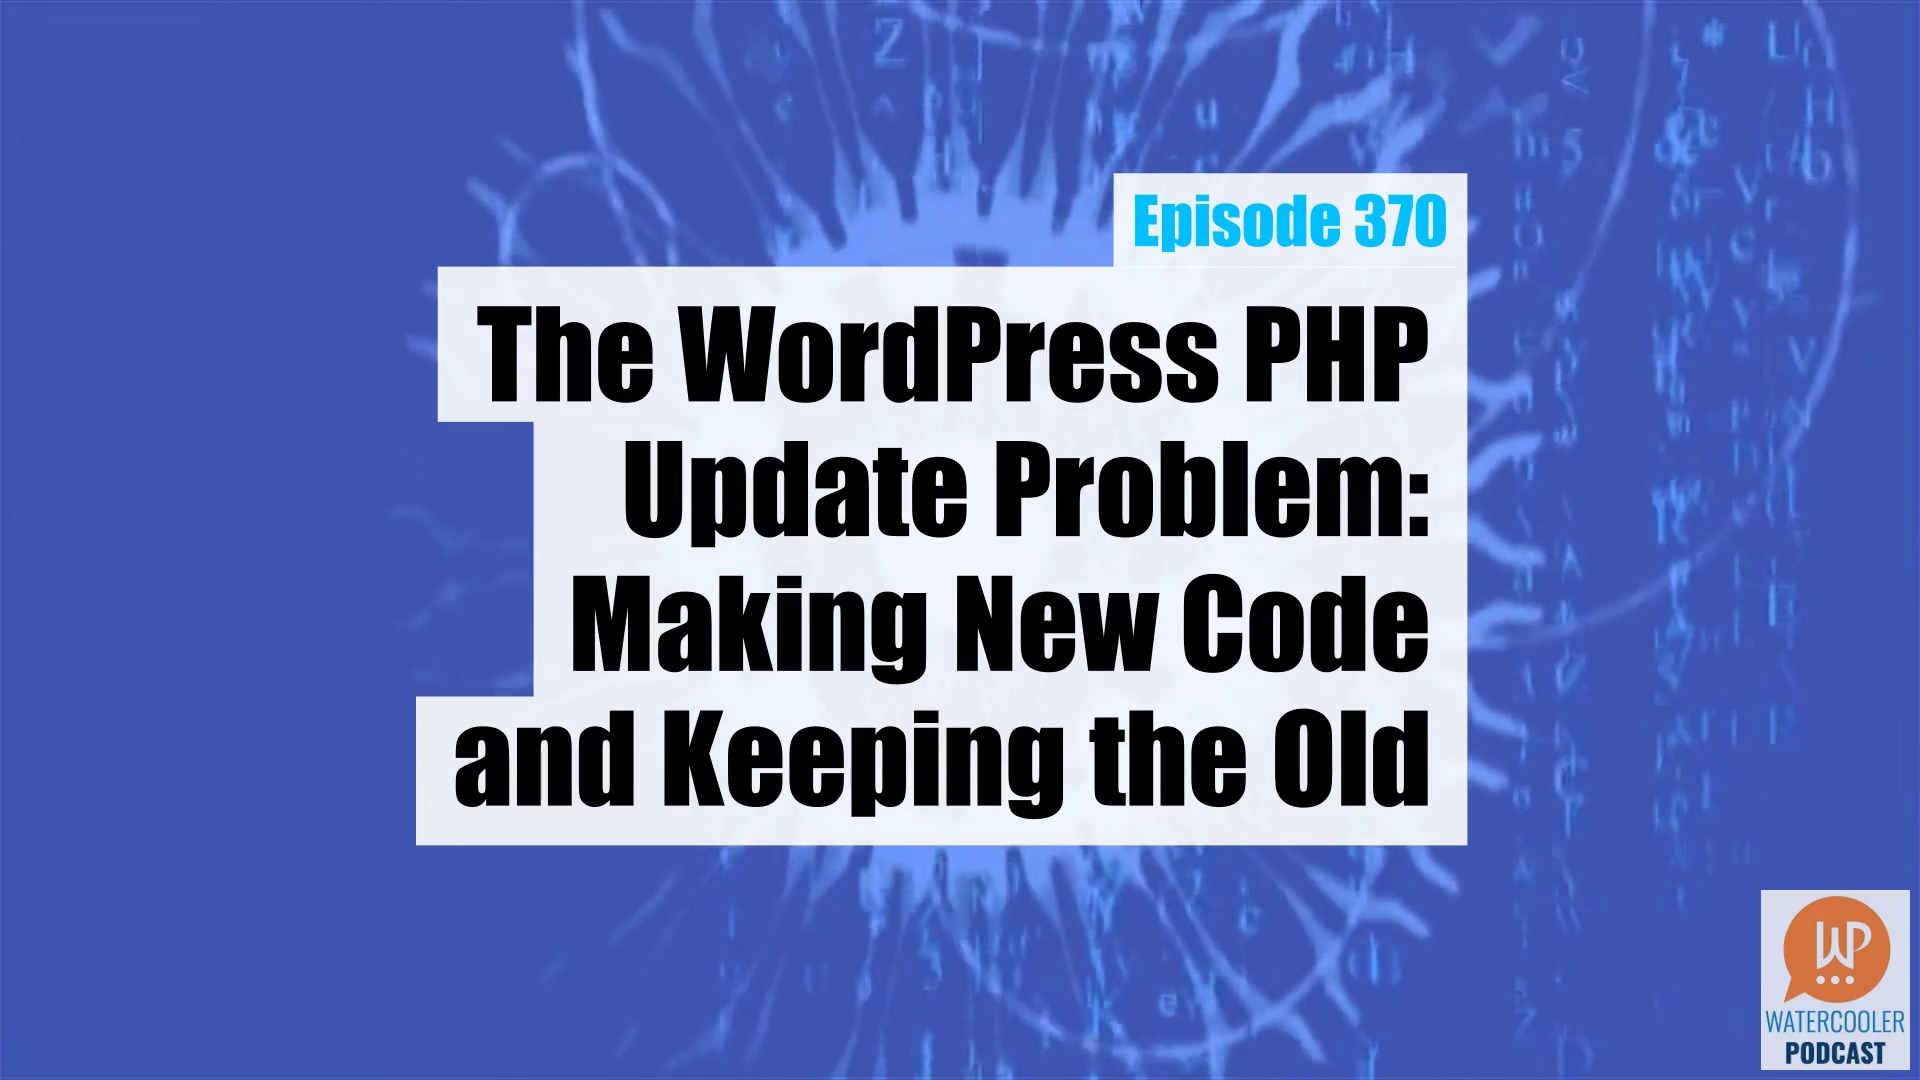 EP370 – The WordPress PHP Update Problem: Making New Code and Keeping the Old